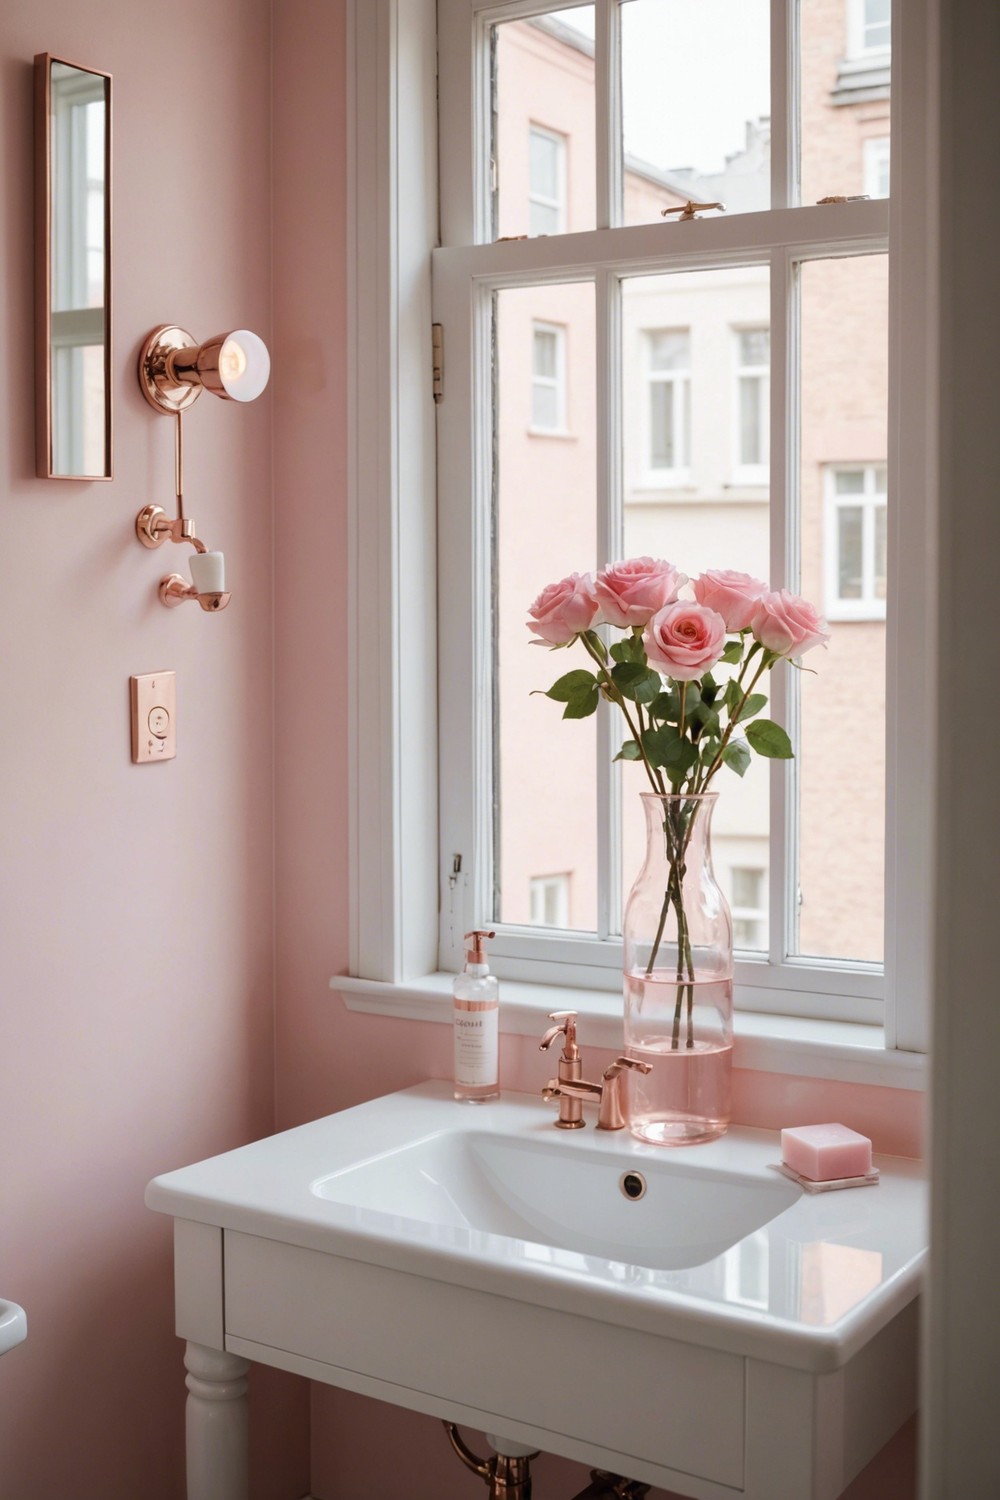 Teeny Tiny: Pink Bathroom Decor for Small Spaces